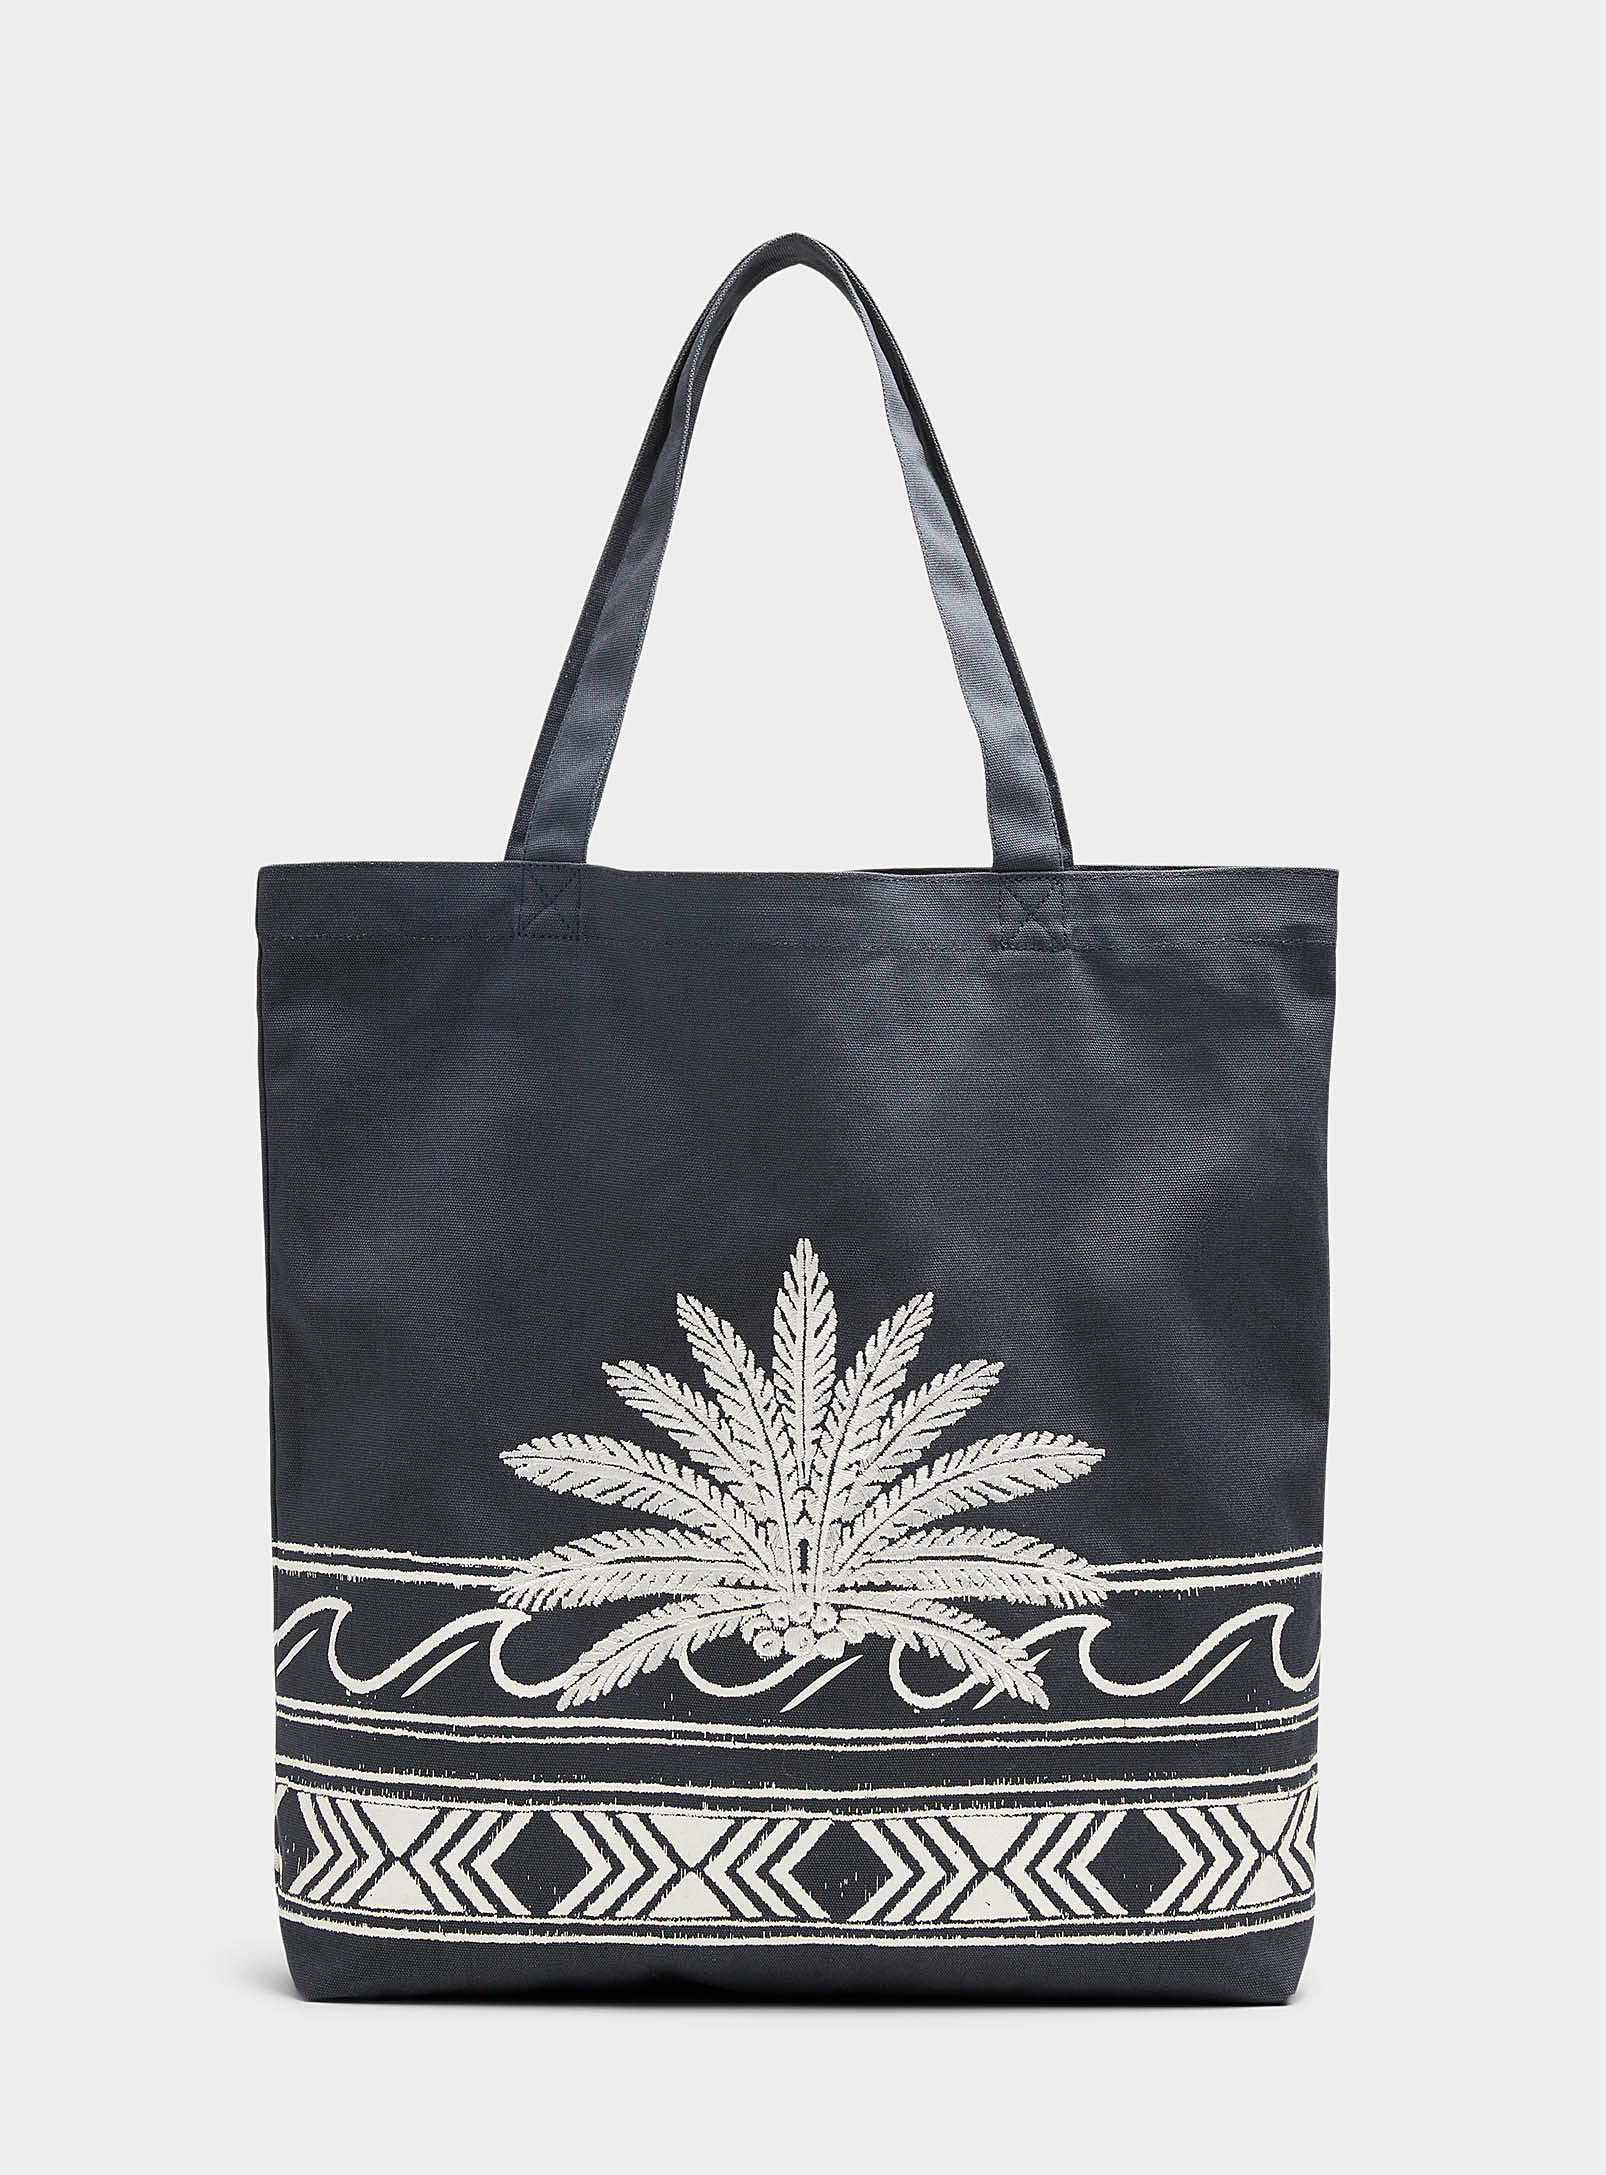 Scotch & Soda - Men's Tropical embroidery and print Tote Bag